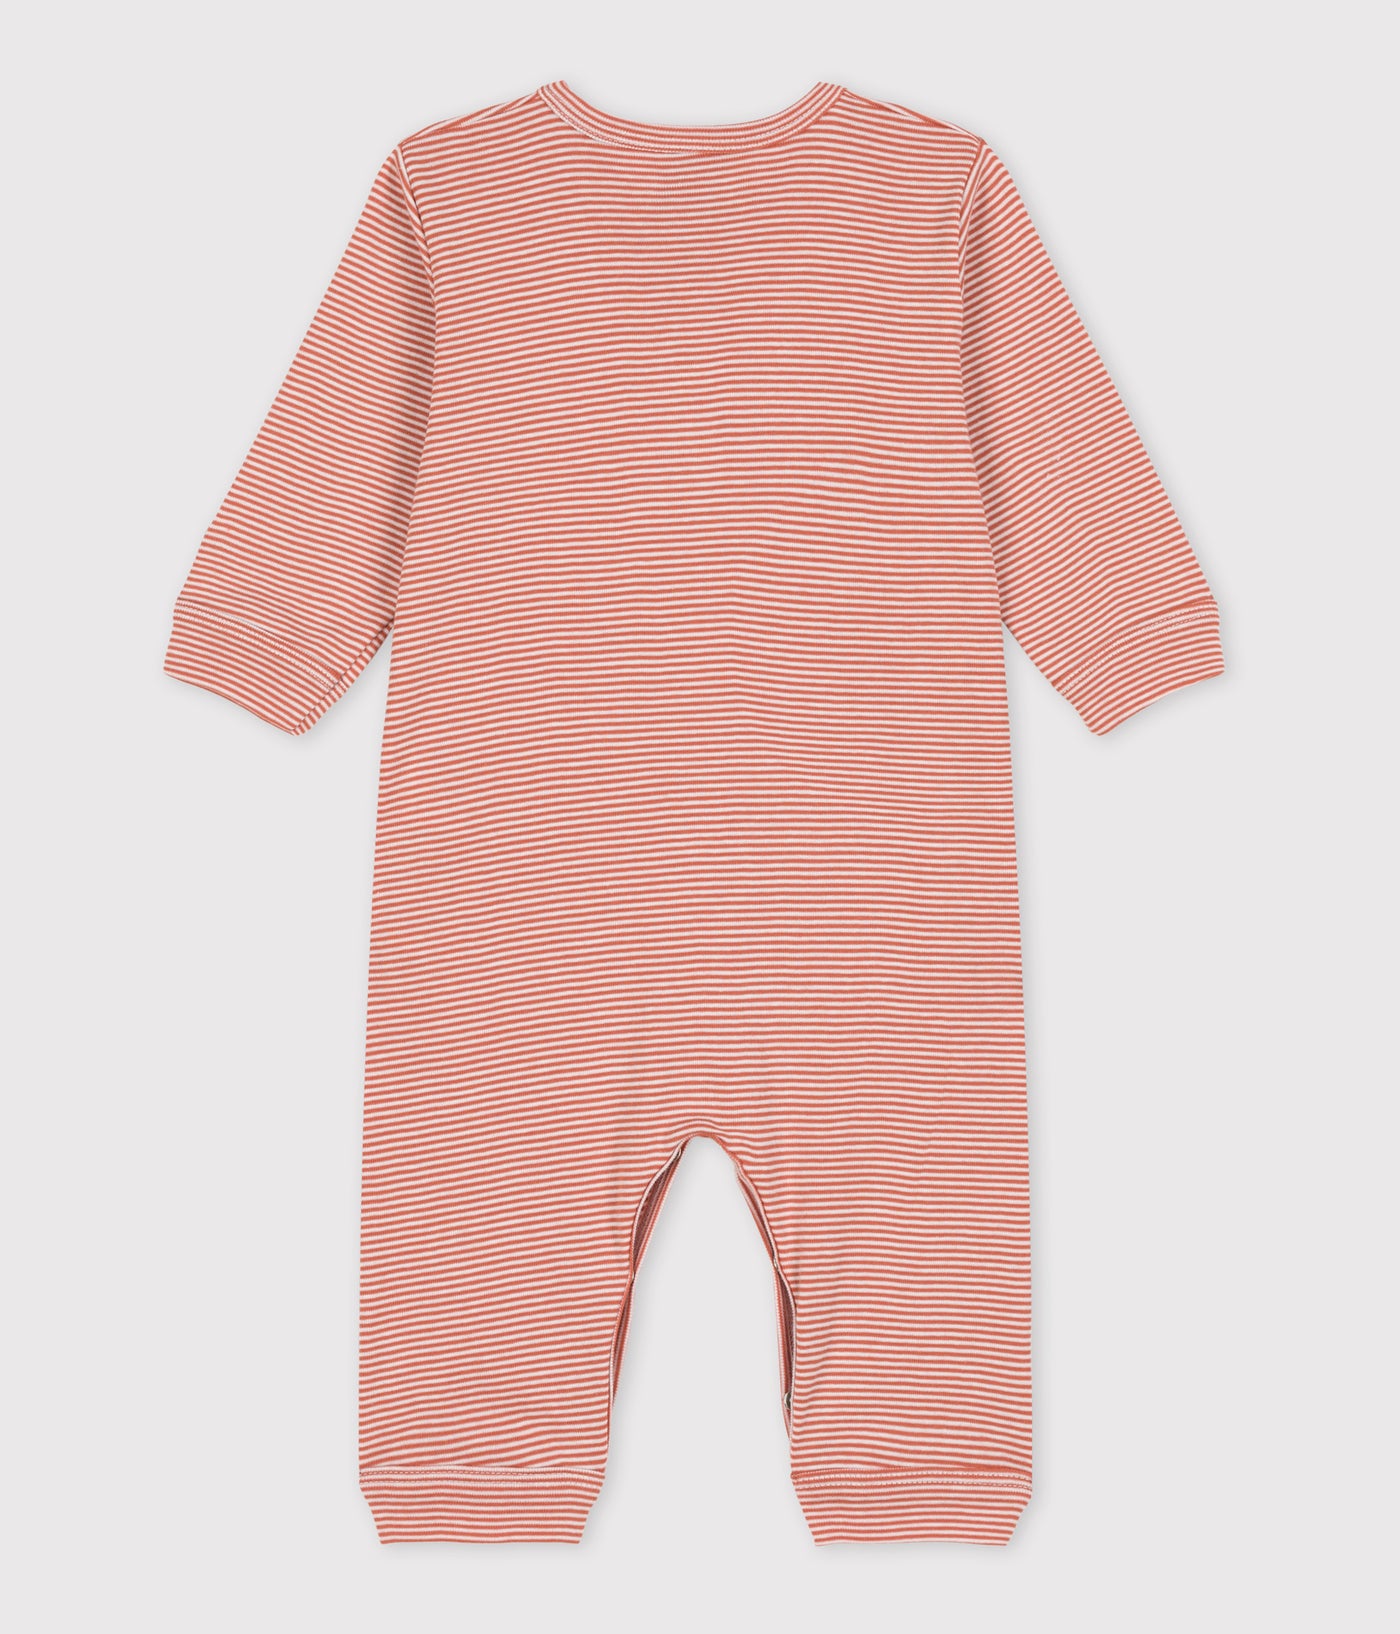 BABIES' FOOTLESS PINSTRIPED COTTON SLEEPSUIT